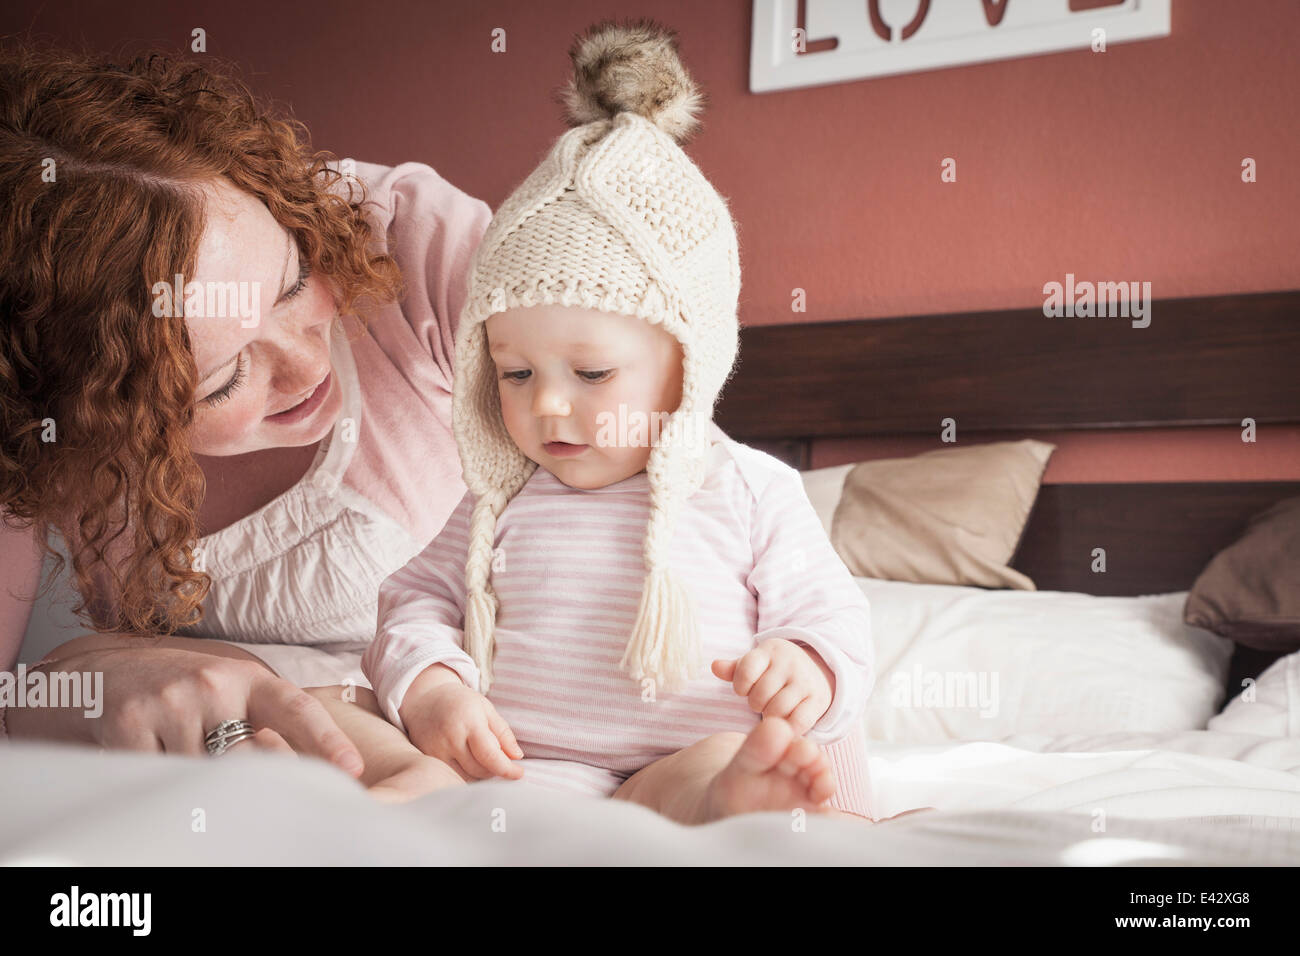 Portrait of mid adult mother and baby girl in knitted hat Stock Photo